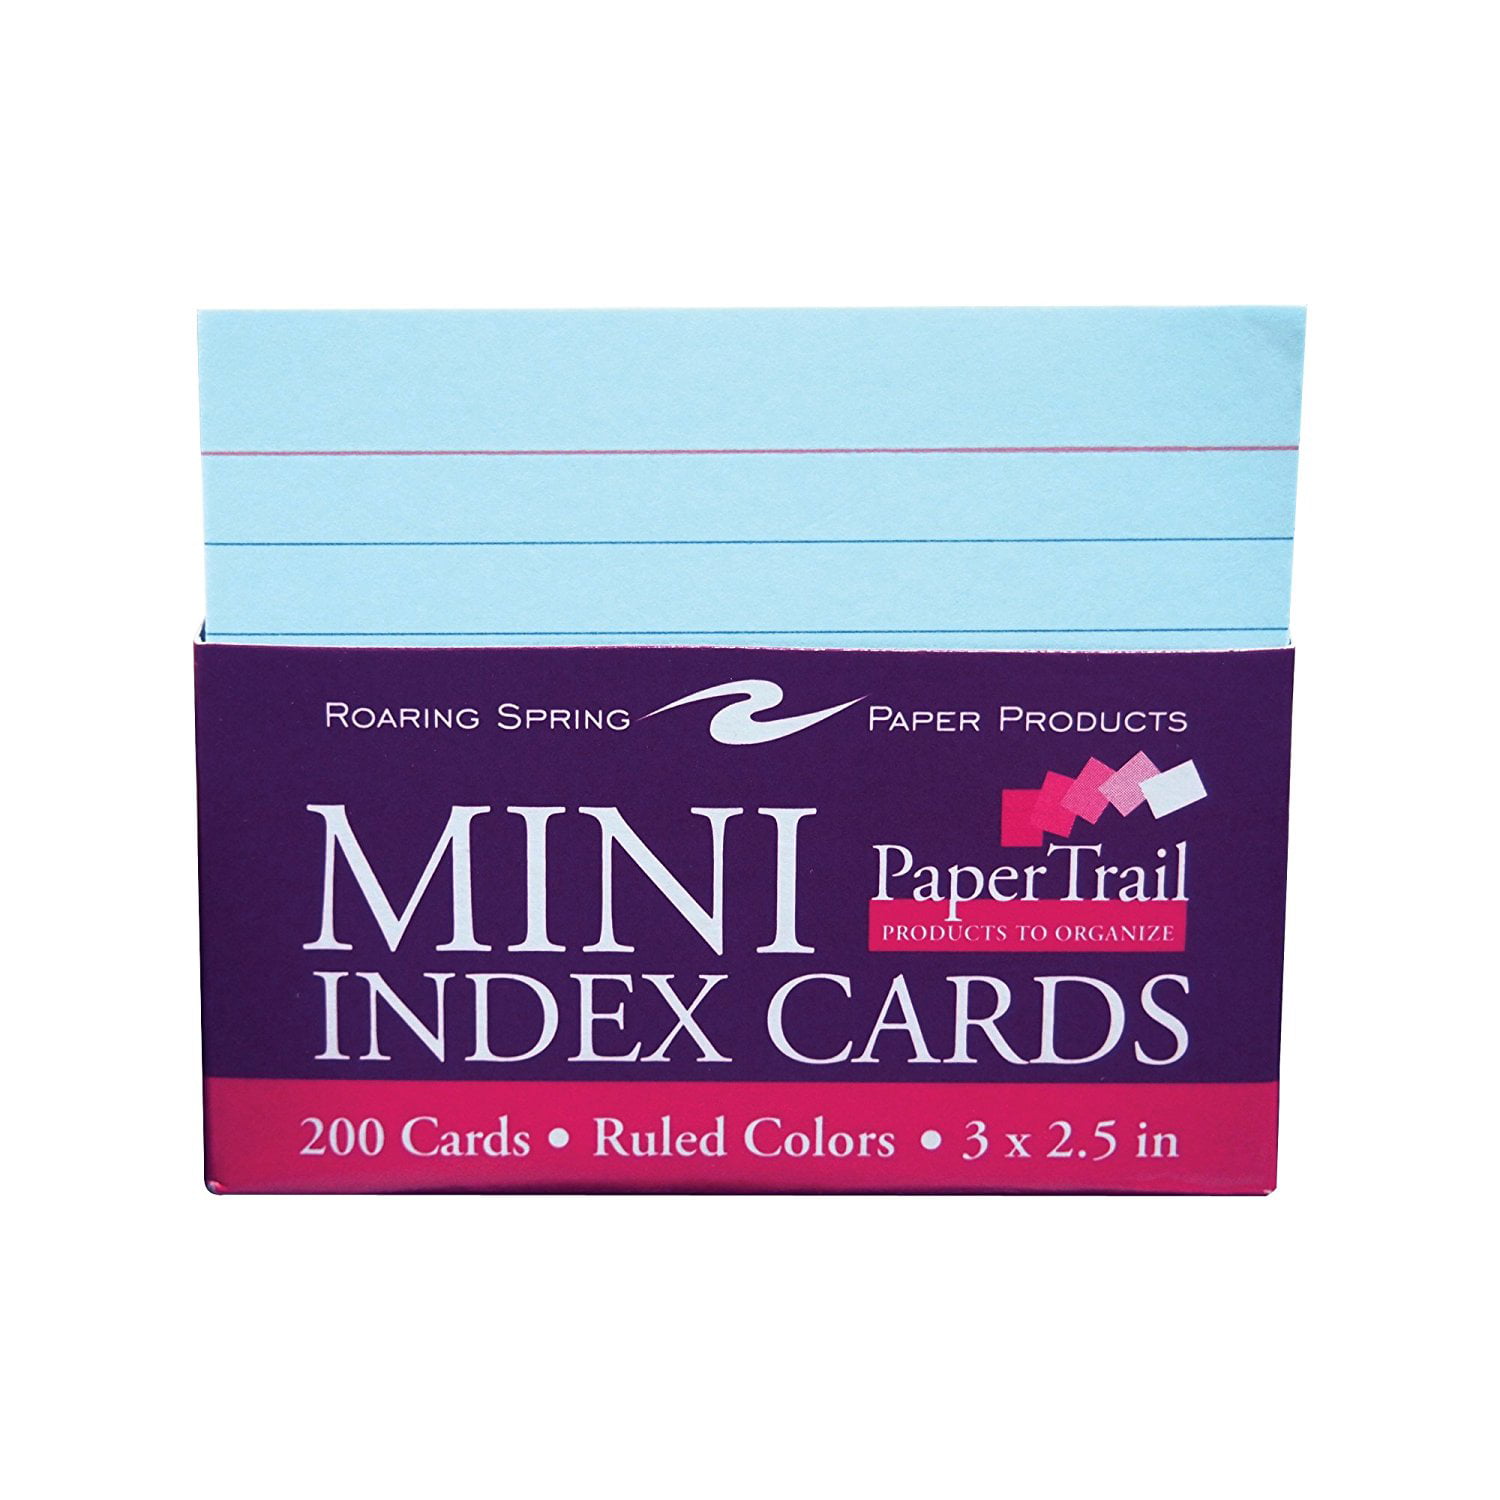 3 x 2.5 Inches Roaring Spring Mini-Index Cards in a Tray 200 per Tray Assorted Colored Paper Ruled One Side